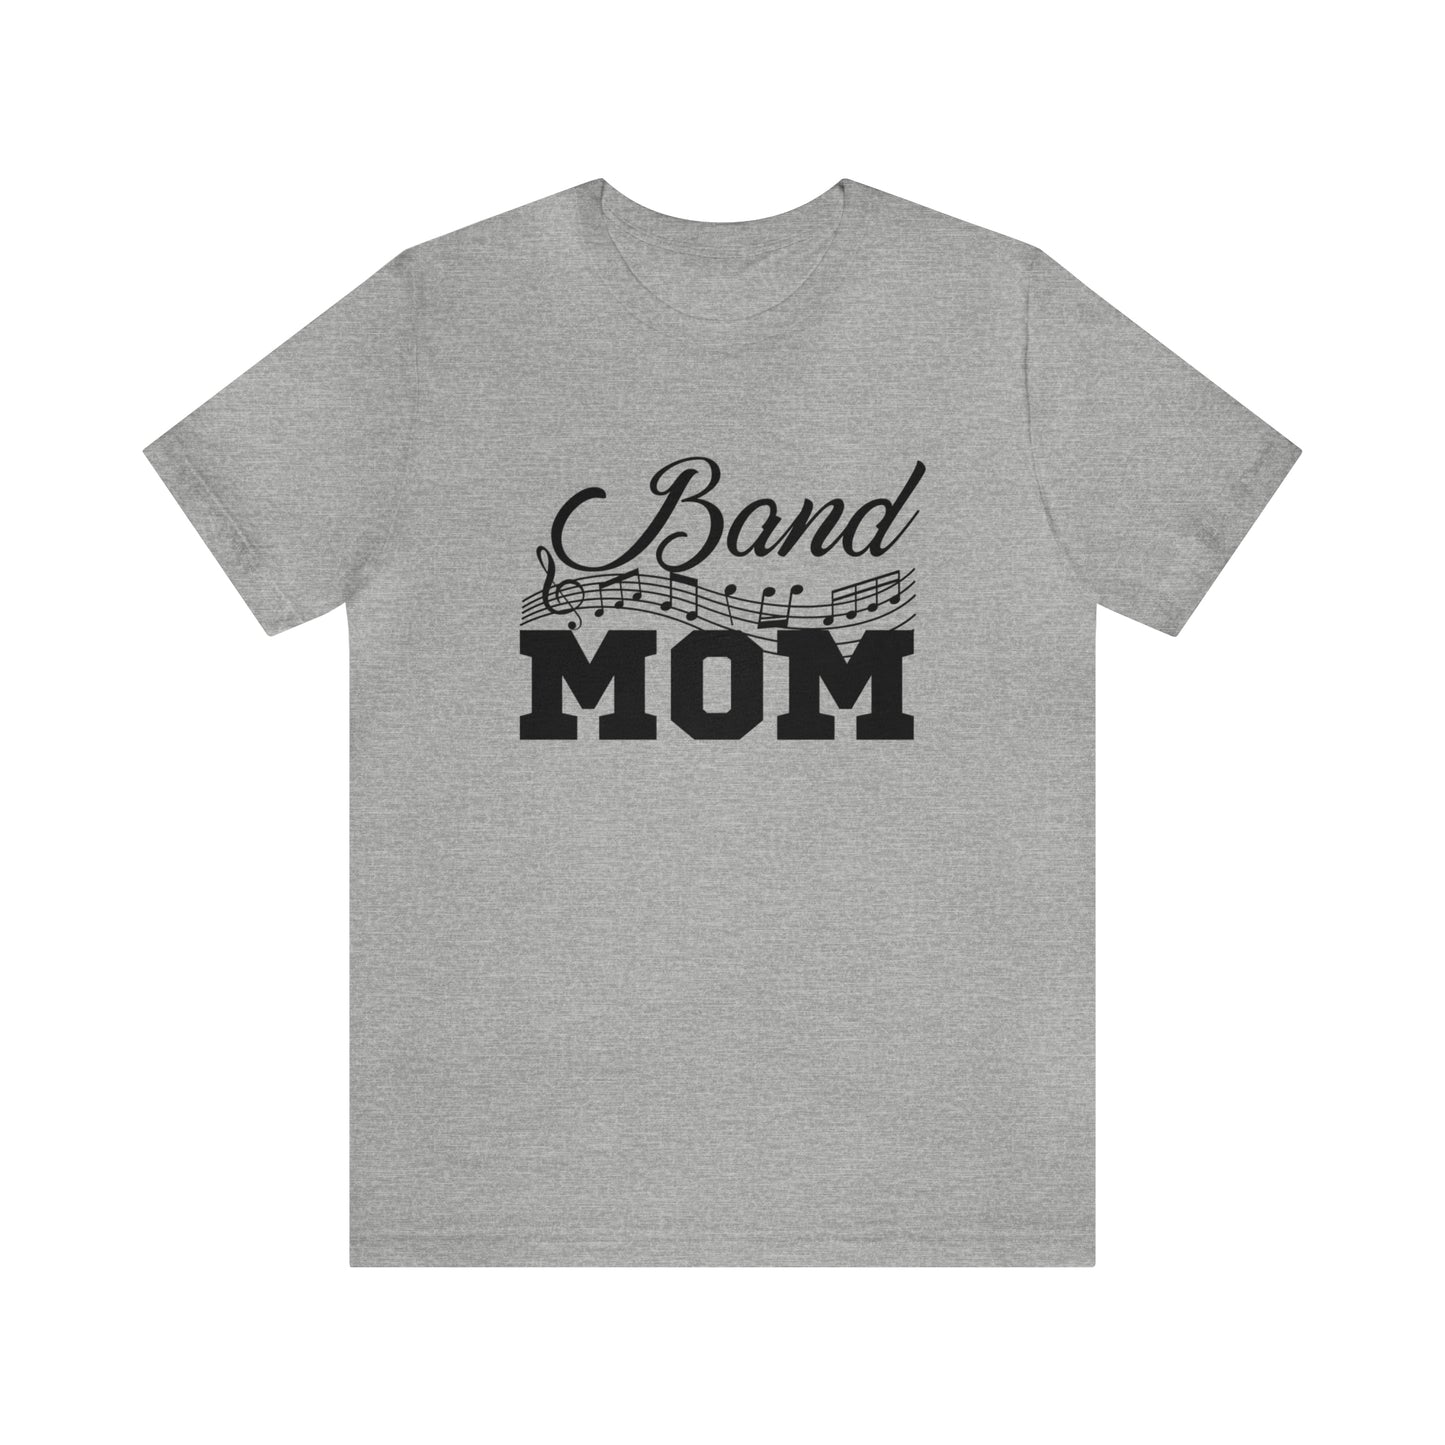 Band mom with music notes Short Sleeve Women's Tee